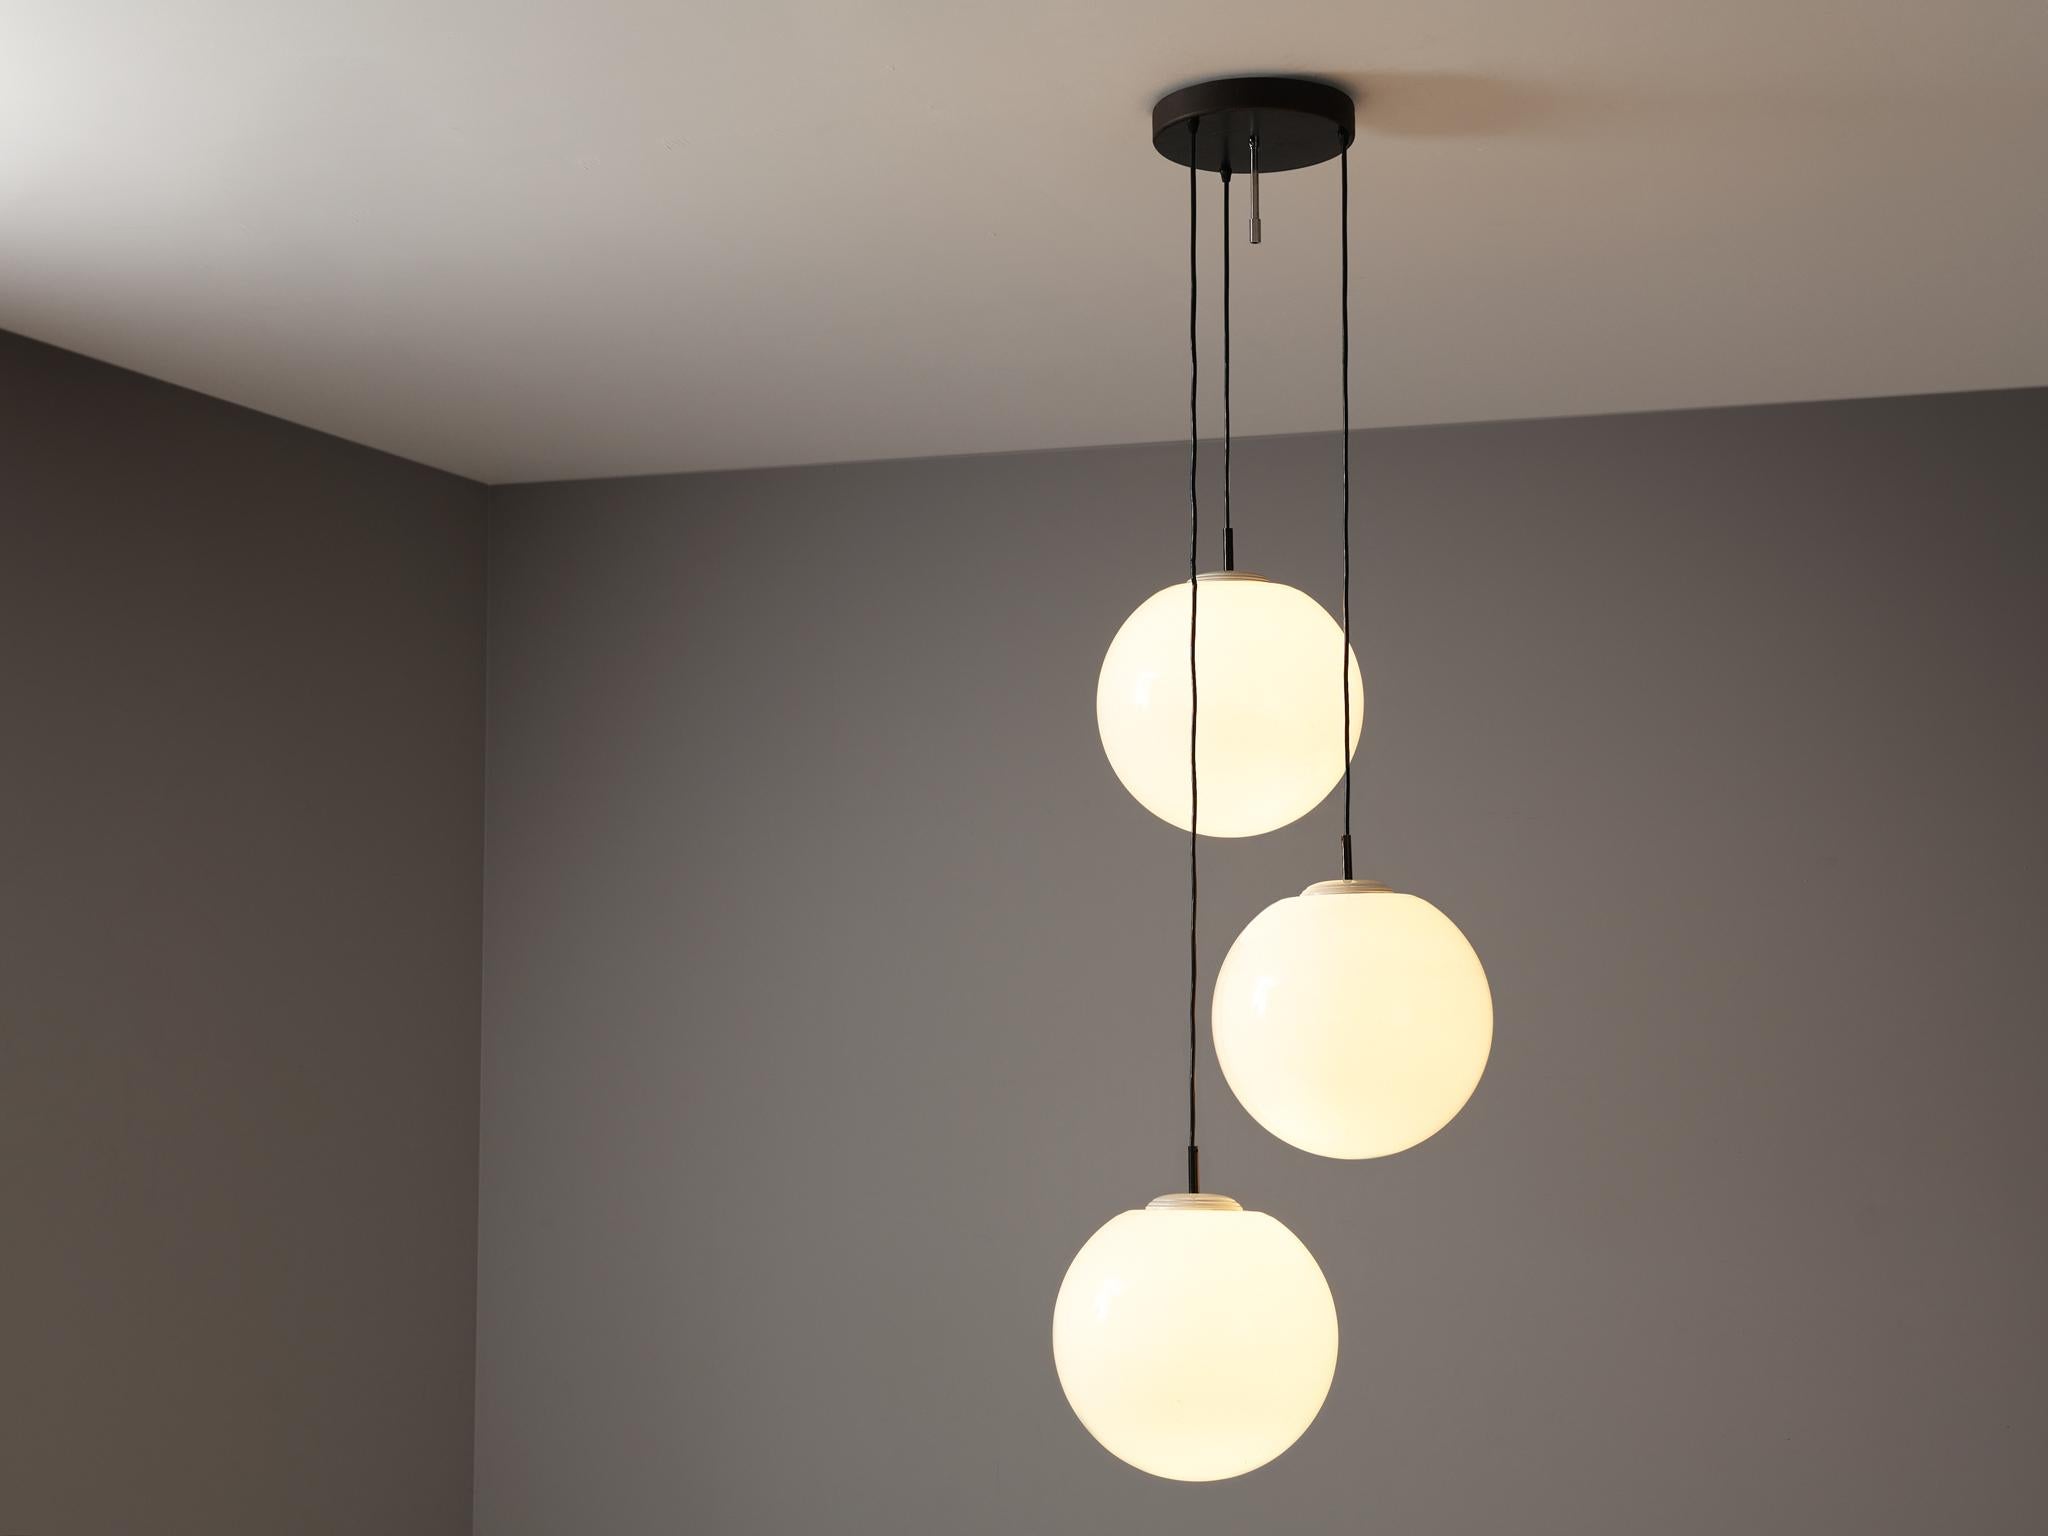 Pendant with three spheres, glass, lacquered metal, Europe, 1960s

A sophisticated composition of three large spheres in white glass are arranged in a spiral form. Each shade is suspended by a sleek, black wire and attached to a round ceiling